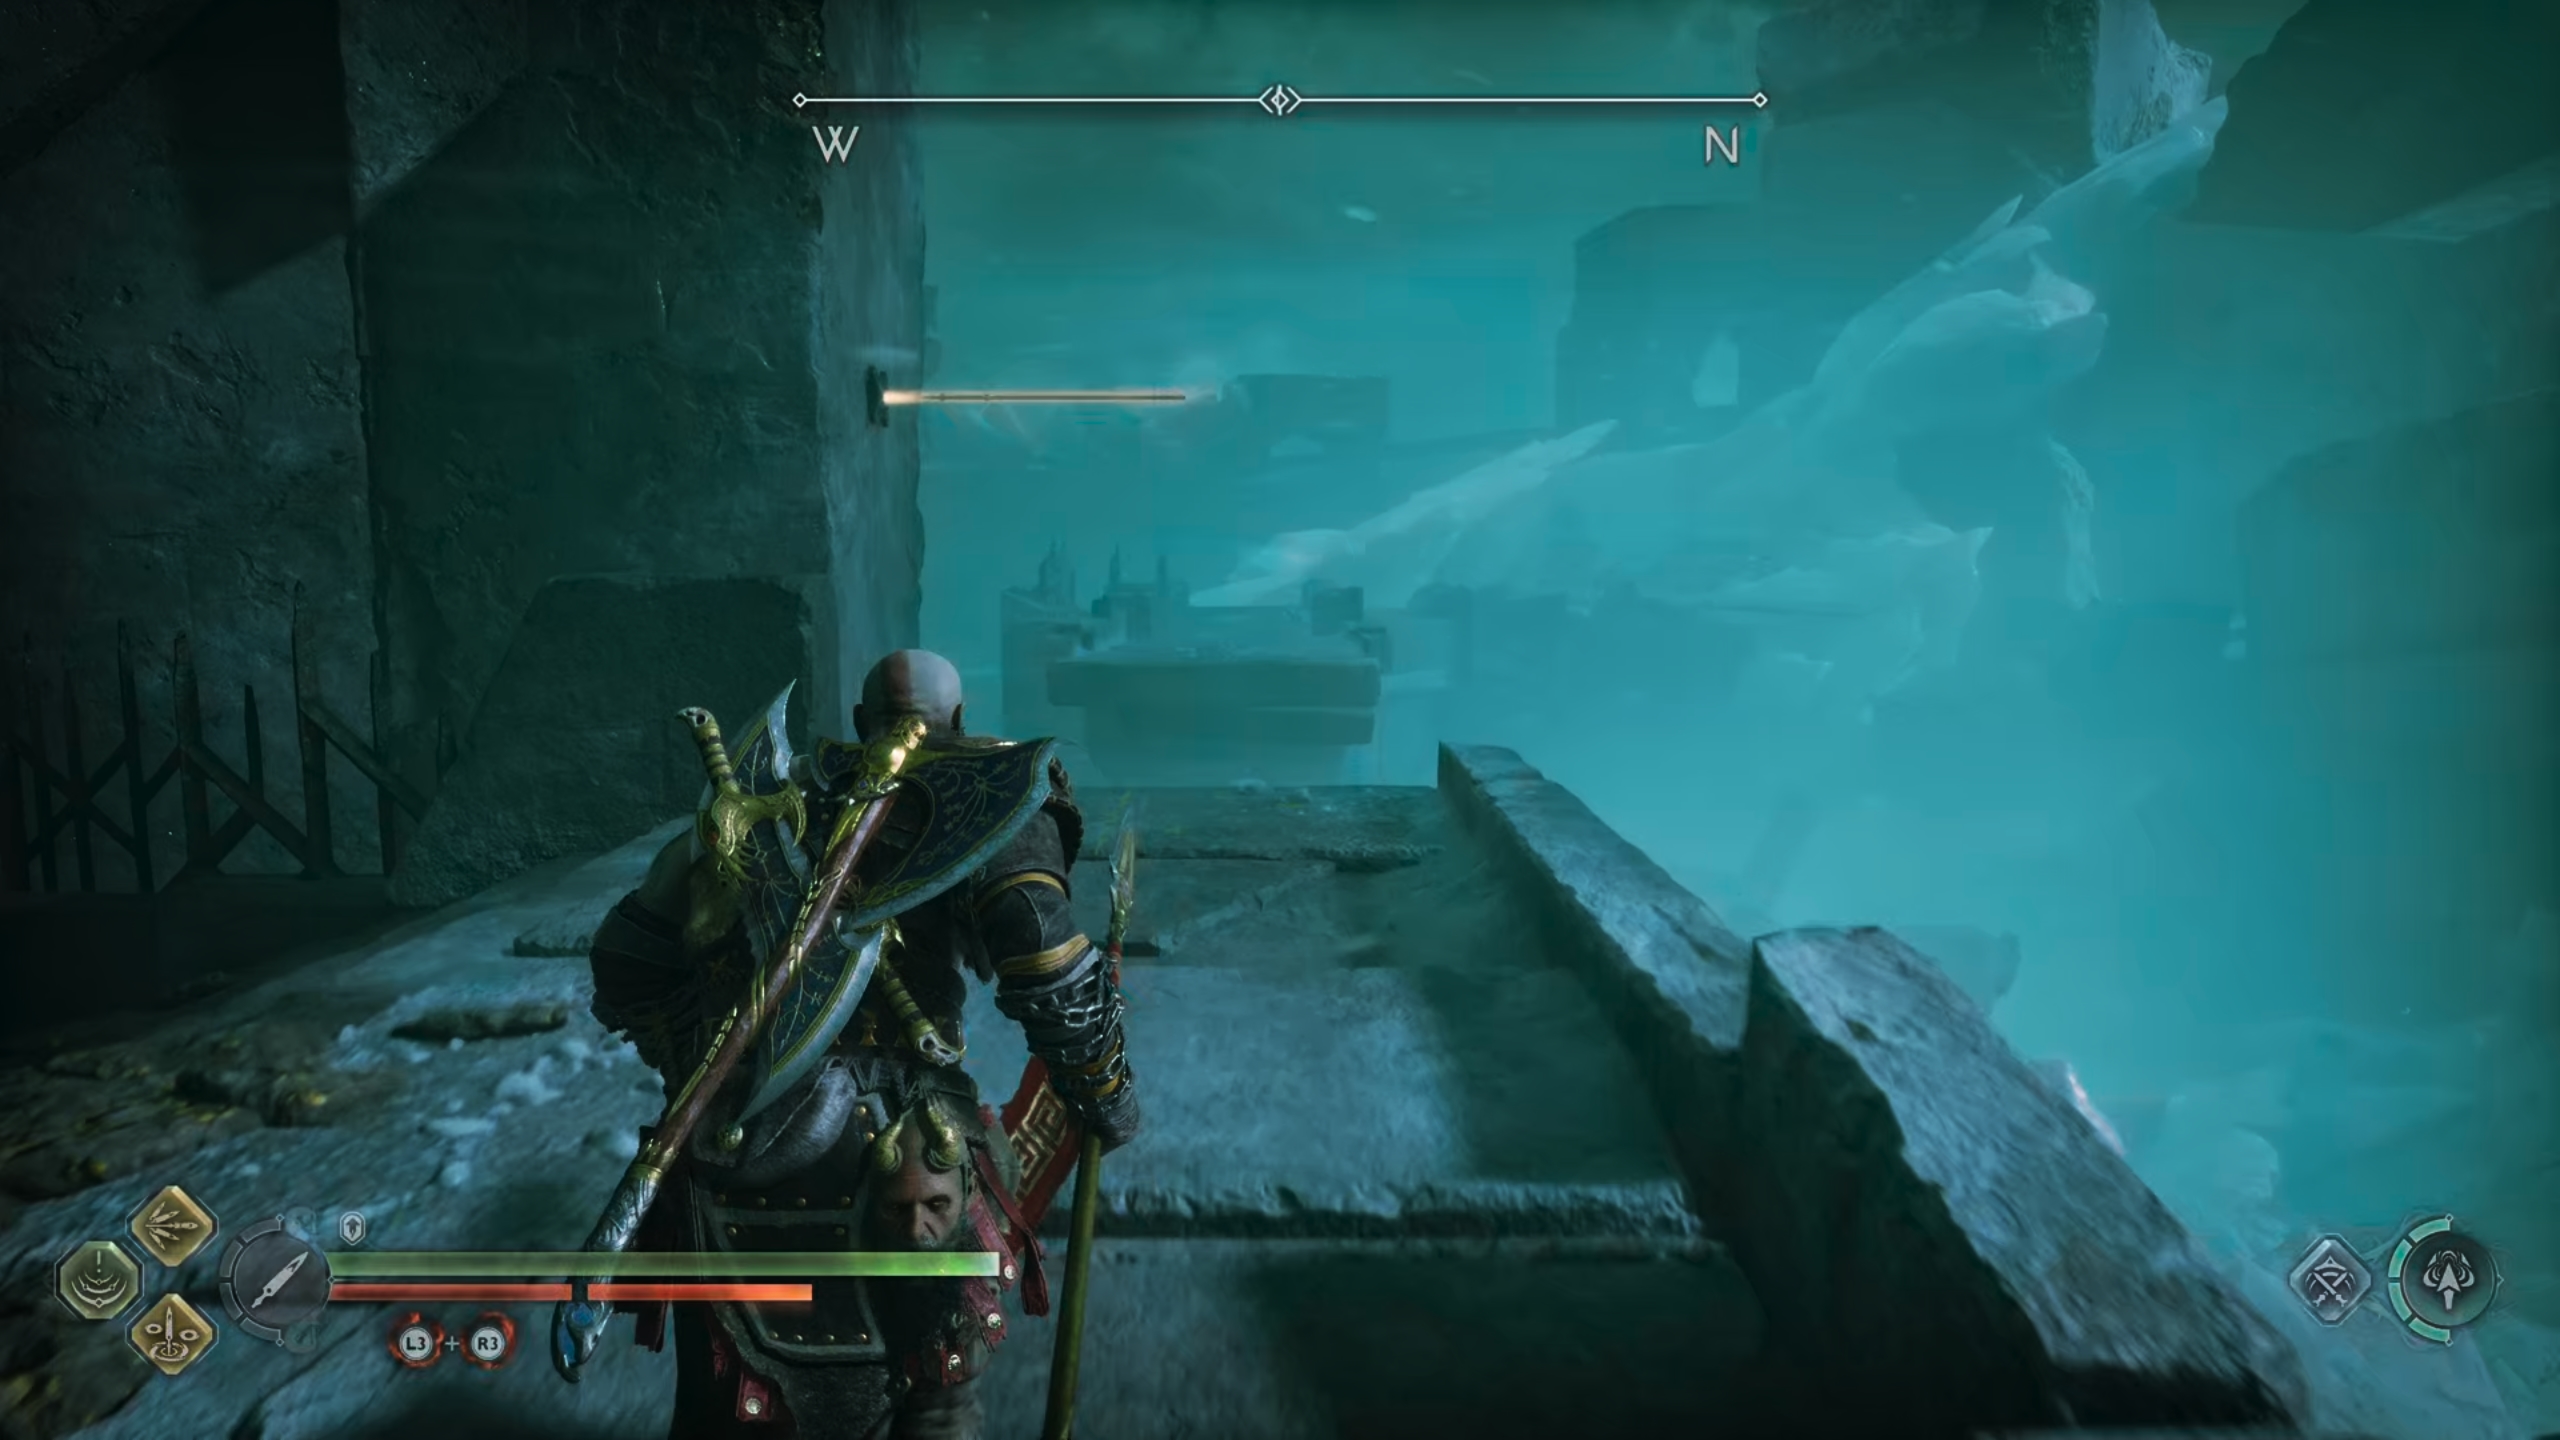 You can swing over to the other side once the spear is in the wall.